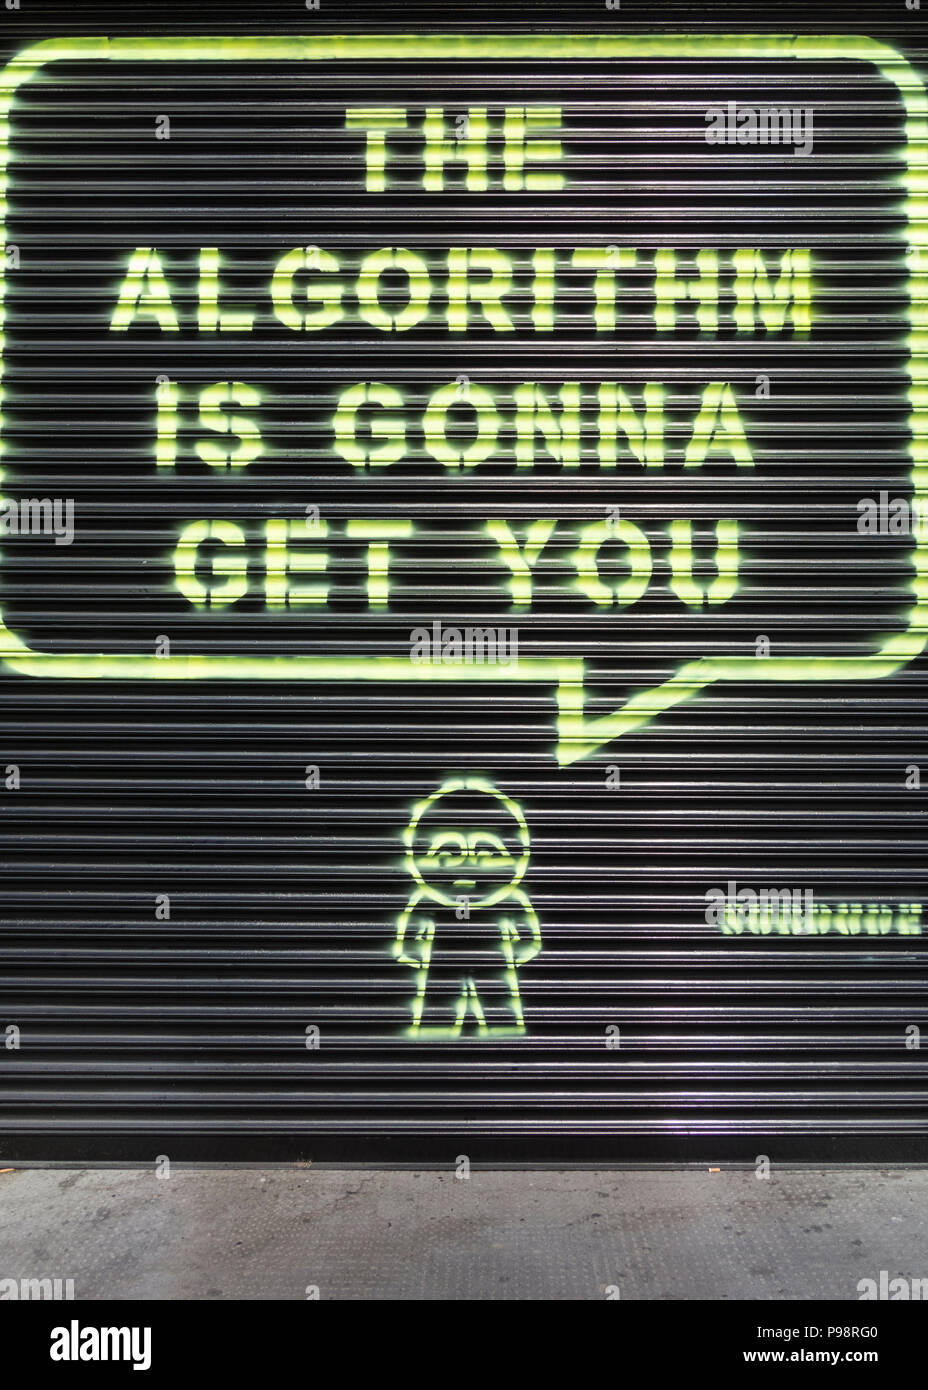 The algorithm is gonna get you by Subdude, opposite Facebook's Rathbone Square HQ in London, UK Stock Photo